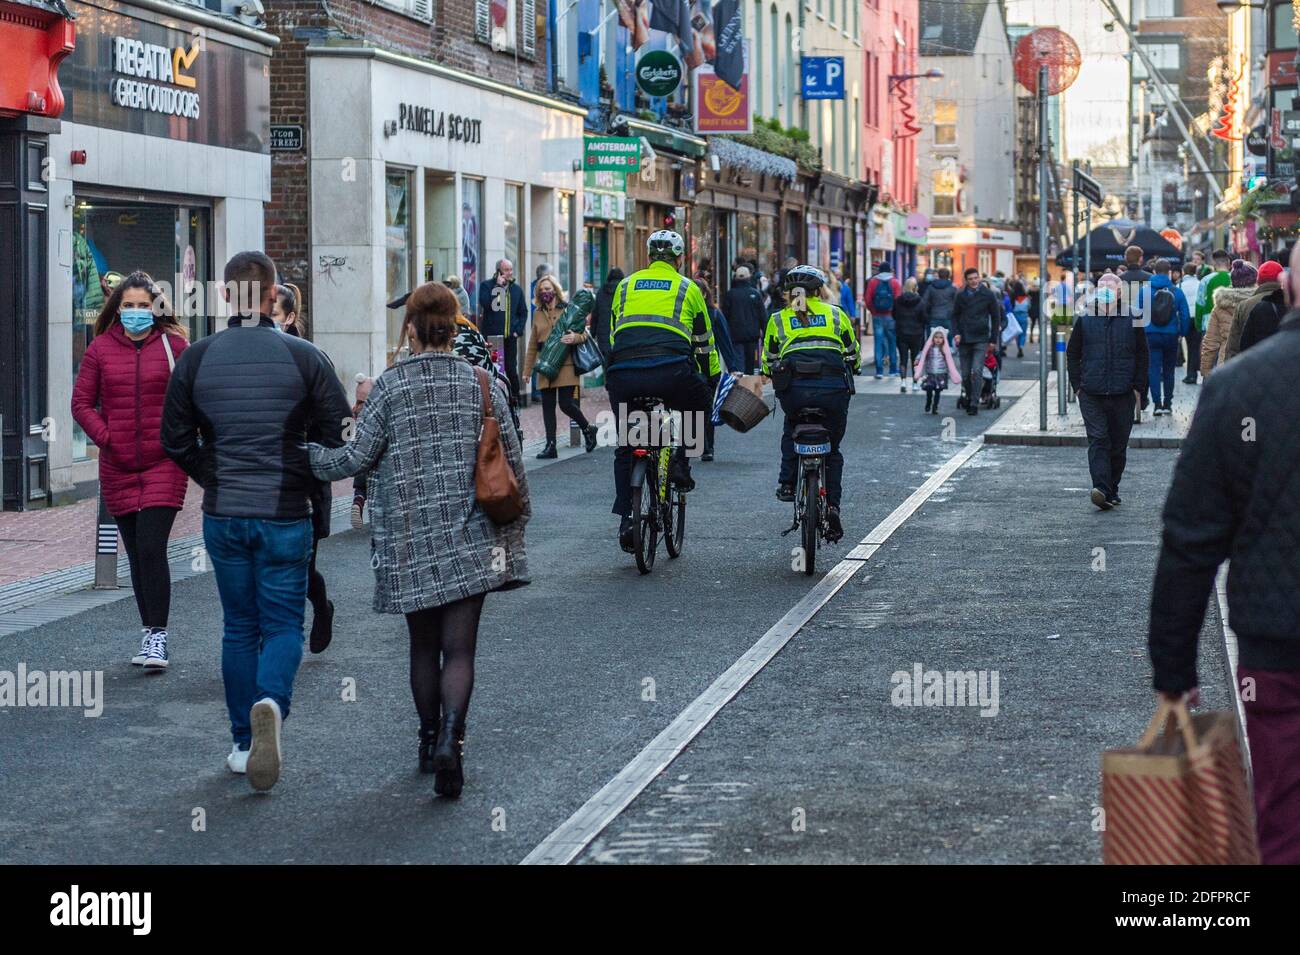 Cork, Ireland. 5th Dec, 2020. Members of An Garda Siochana patrol Oliver Plunkett Street in Cork city on a very busy shopping day in Cork city. Credit: AG News/Alamy Live News Stock Photo